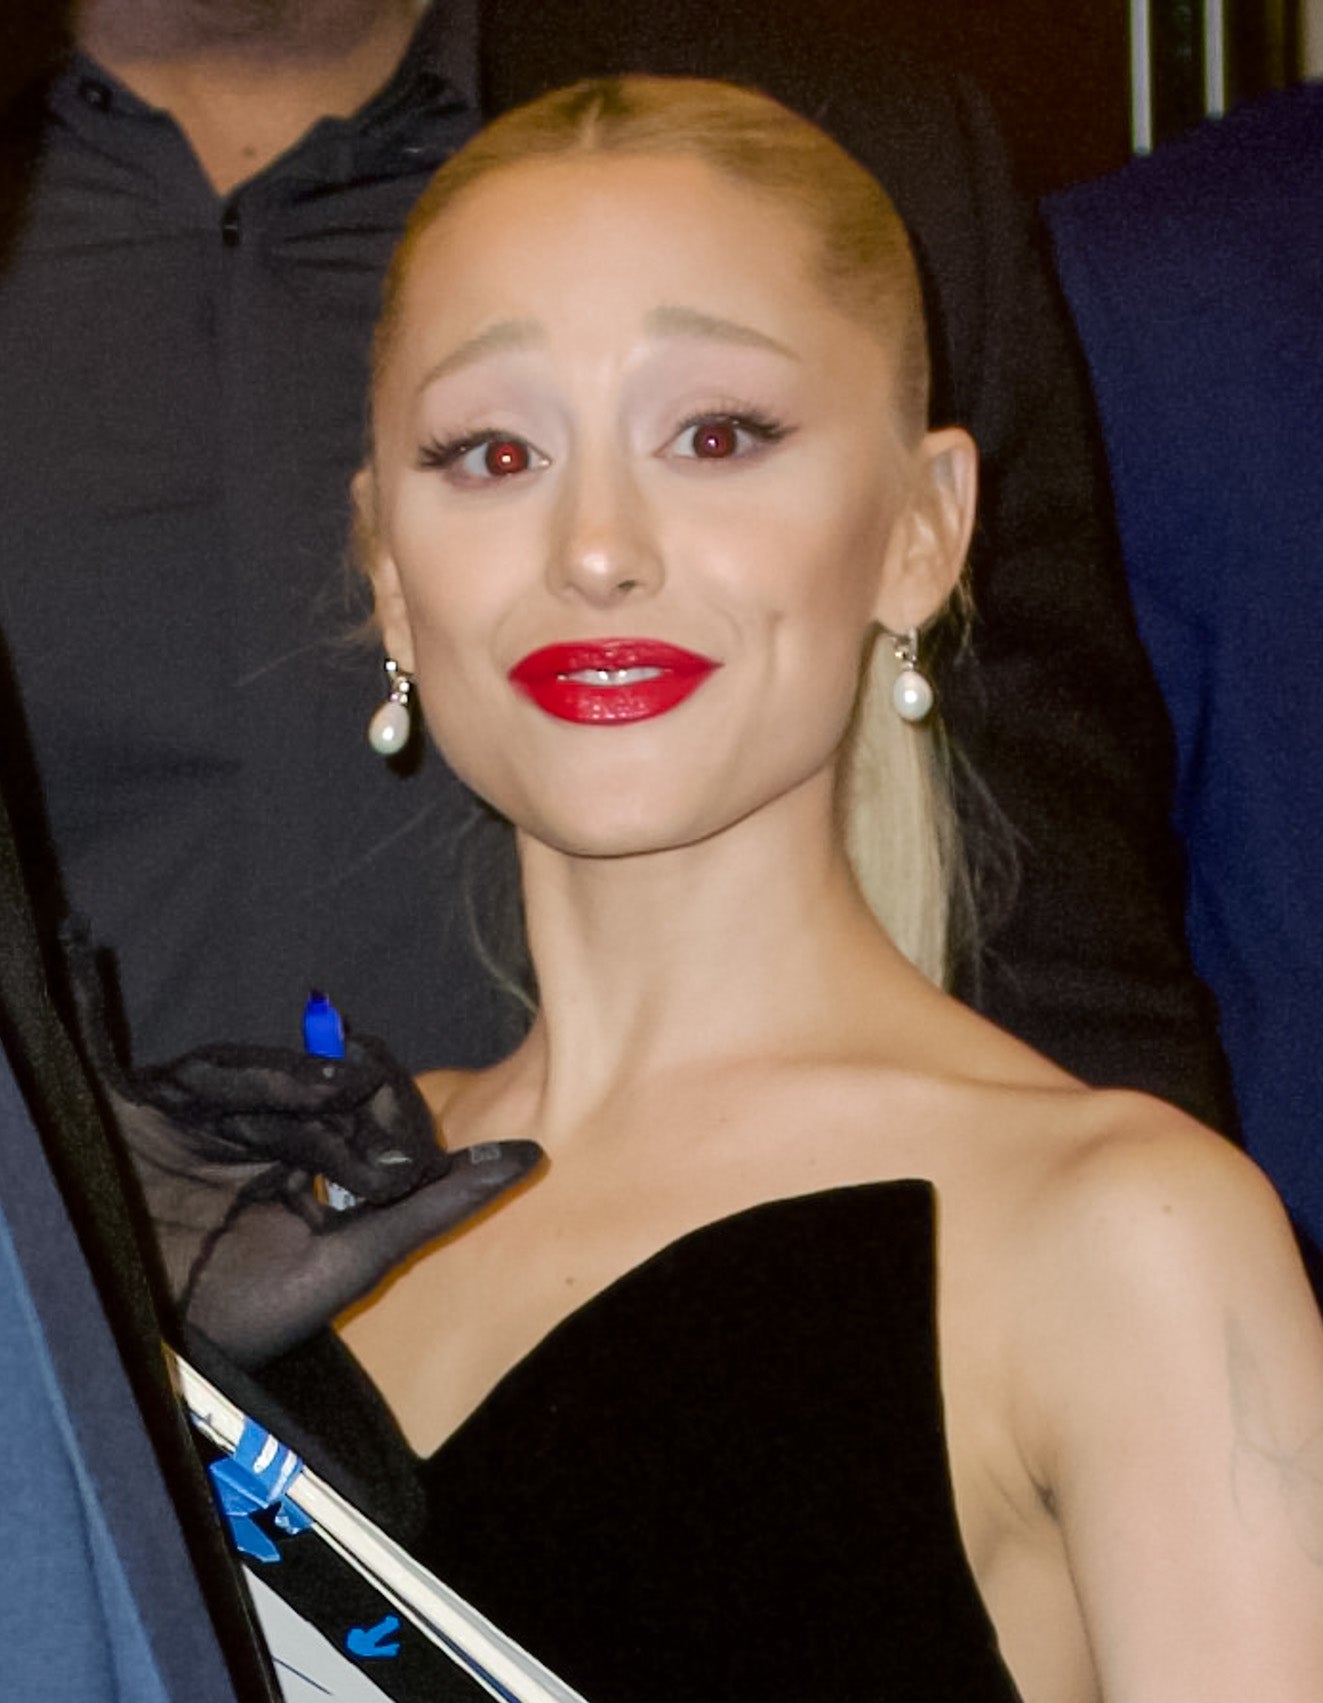 Ariana Grande with sleek bun, red lipstick, and black off-shoulder outfit smiling